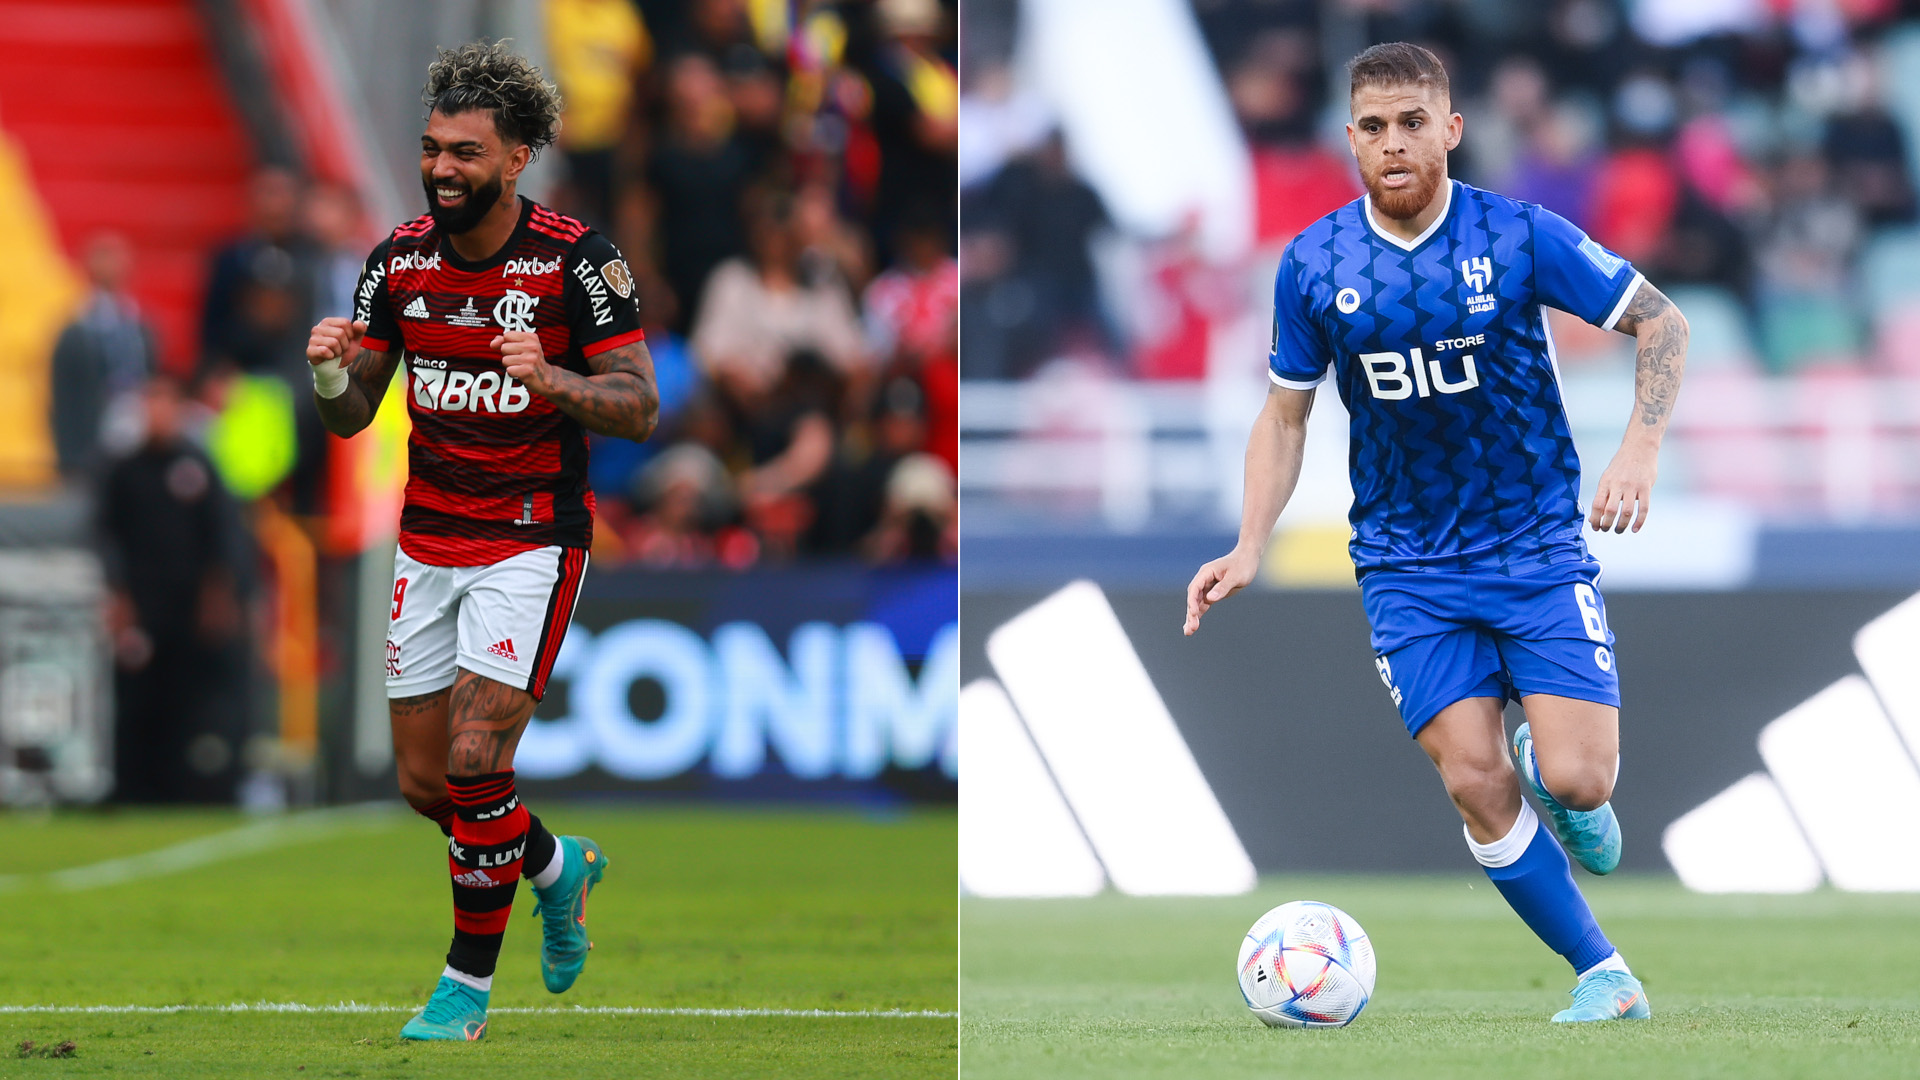 Flamengo vs Al-Hilal live stream and how to watch the FIFA Club World Cup 2023